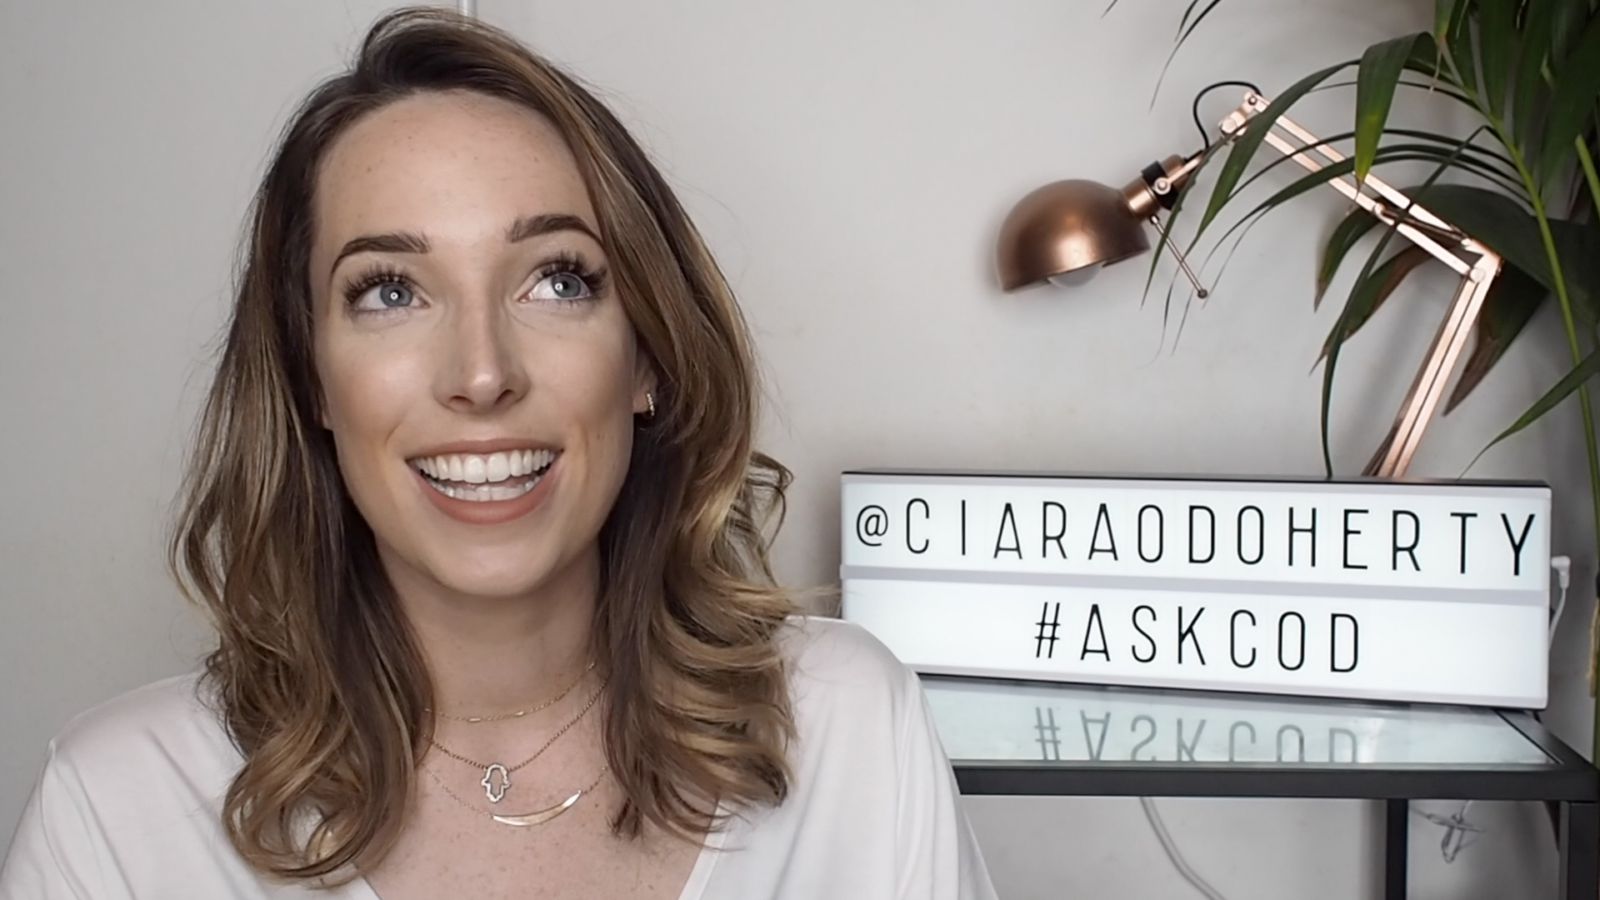 VIDEO: MY FIRST EVER SNAPCHAT Q&A!